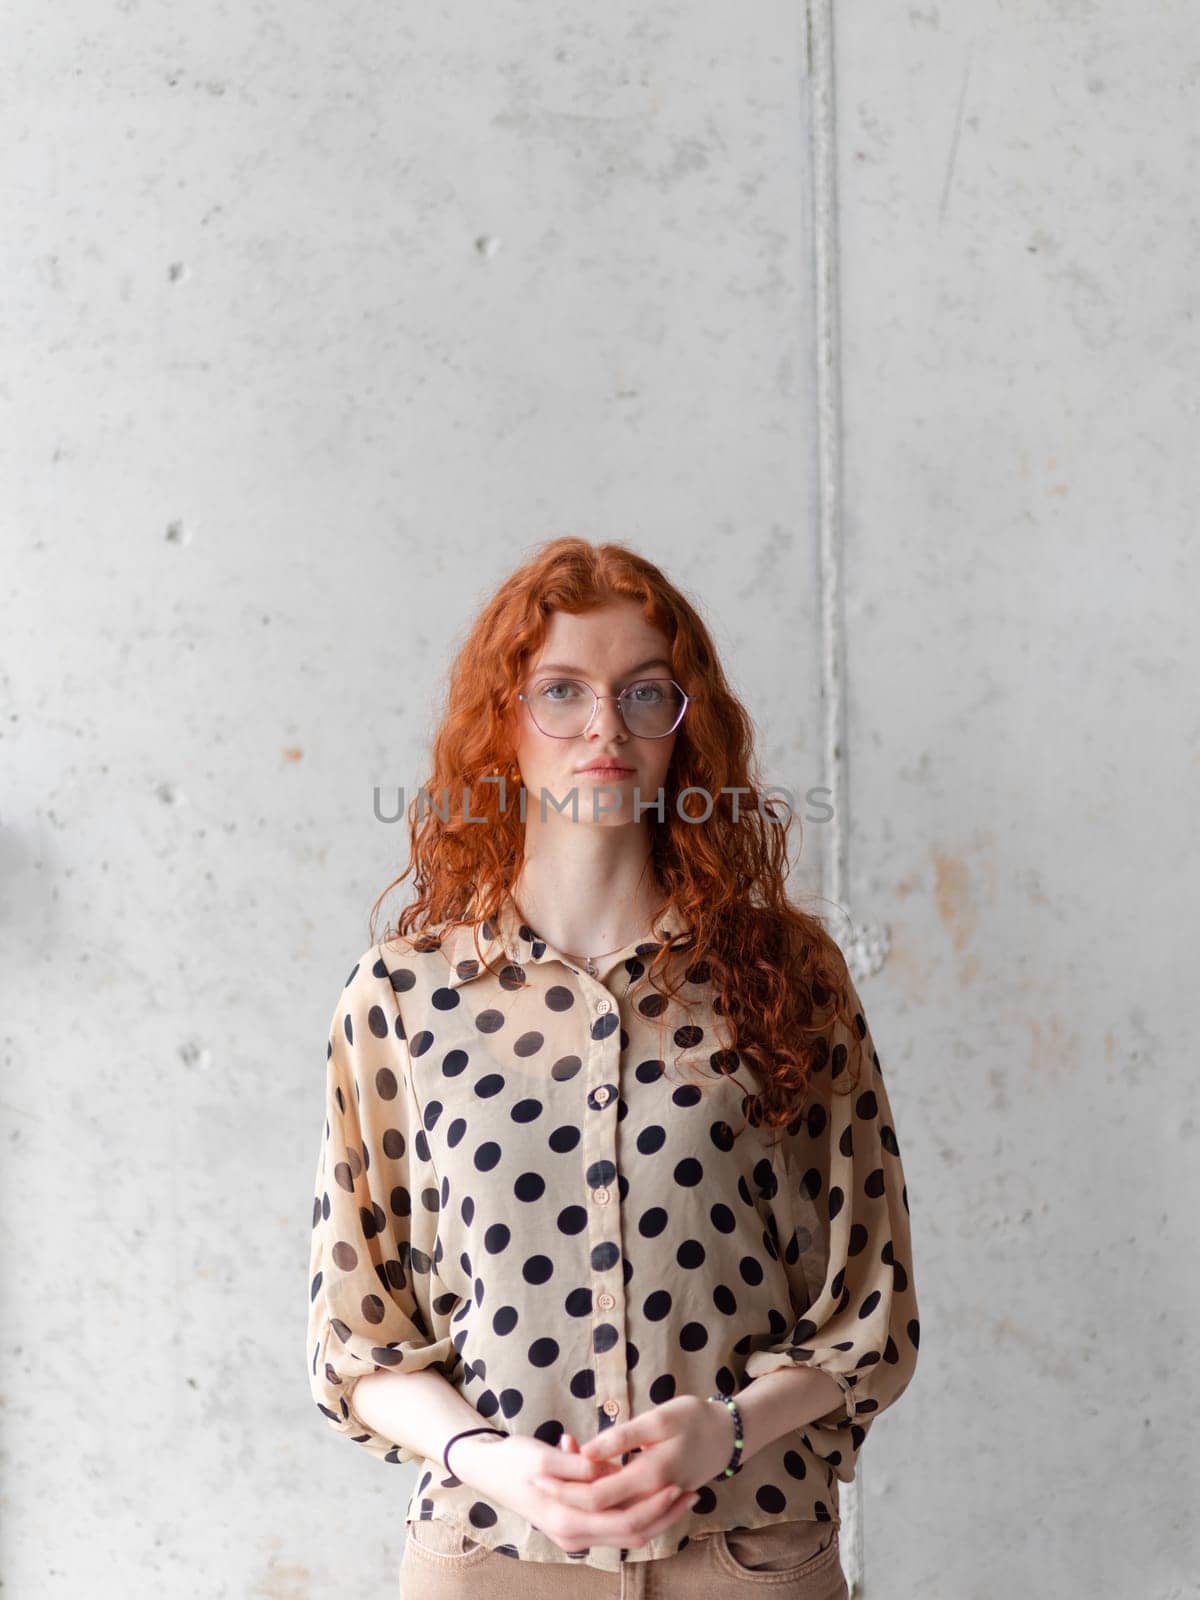 A young entrepreneur with captivating orange hair is striking a confident pose in front of a stylish gray wall